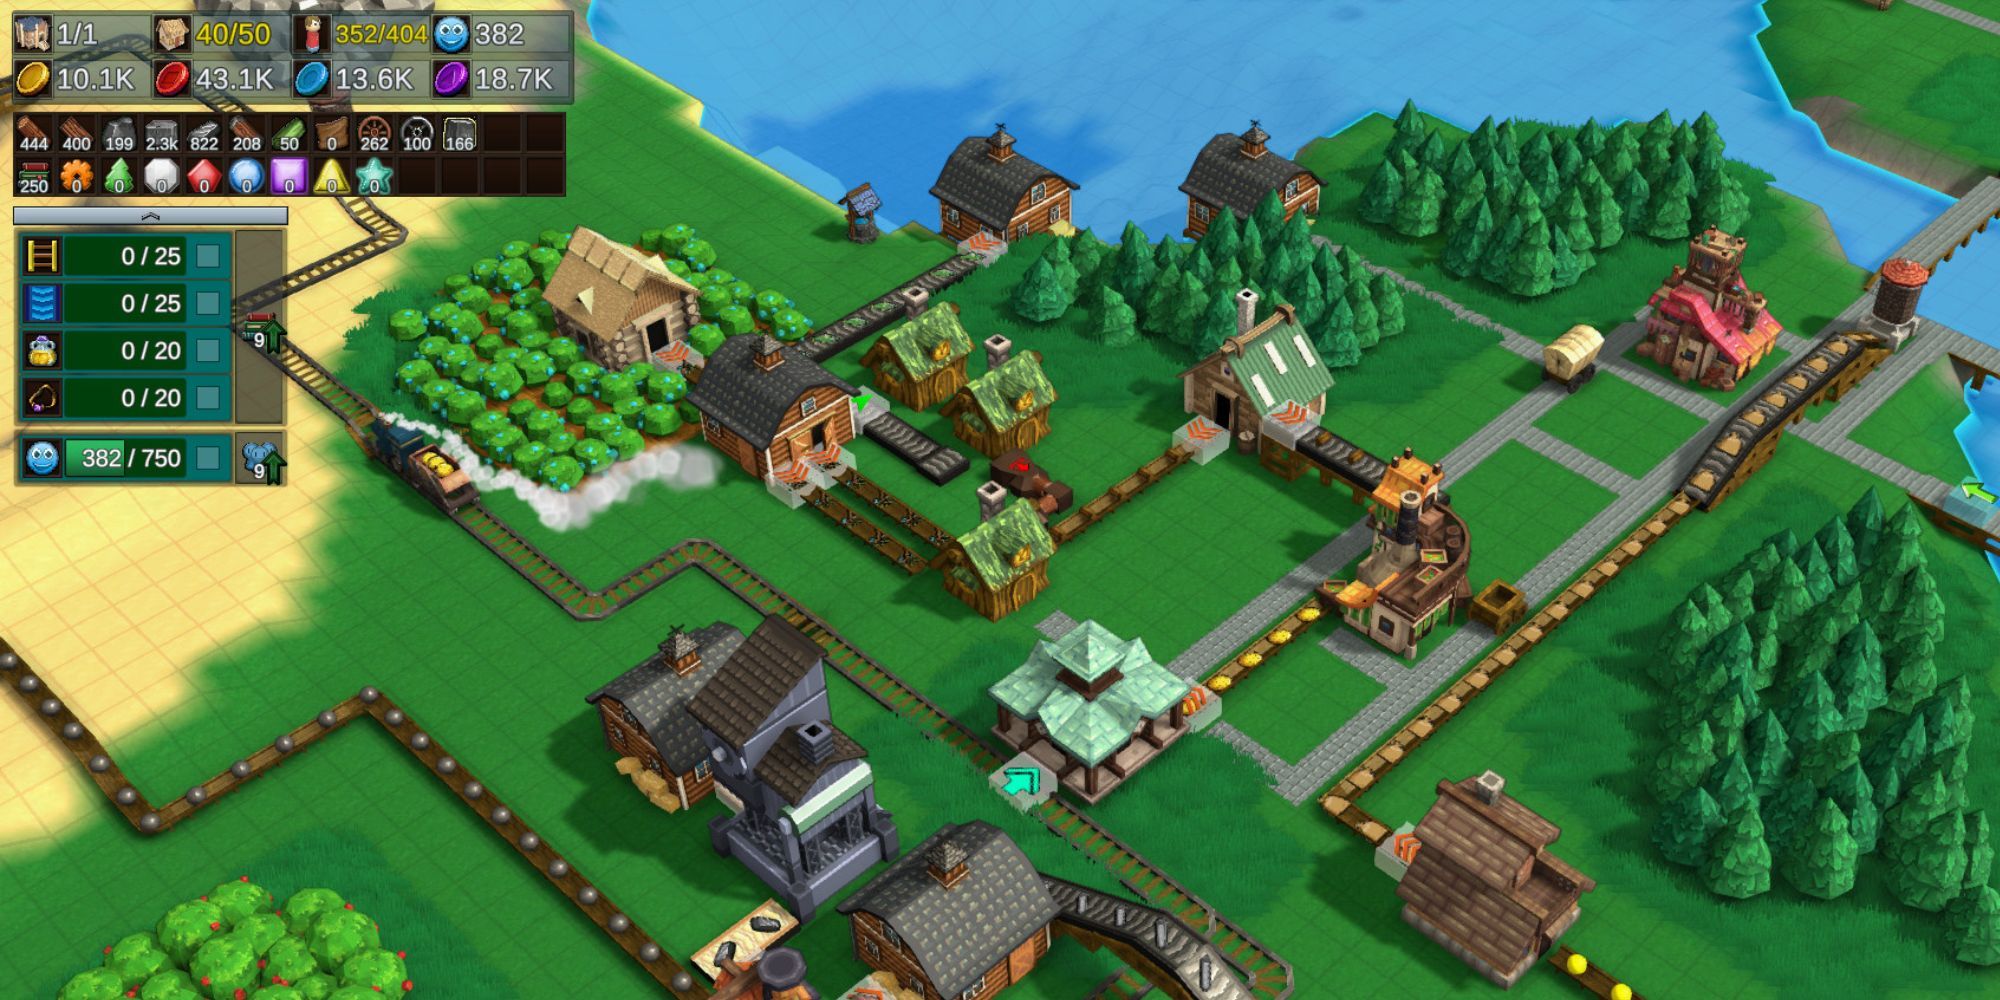 A small town by the water with conveyors running through it in Factory Town